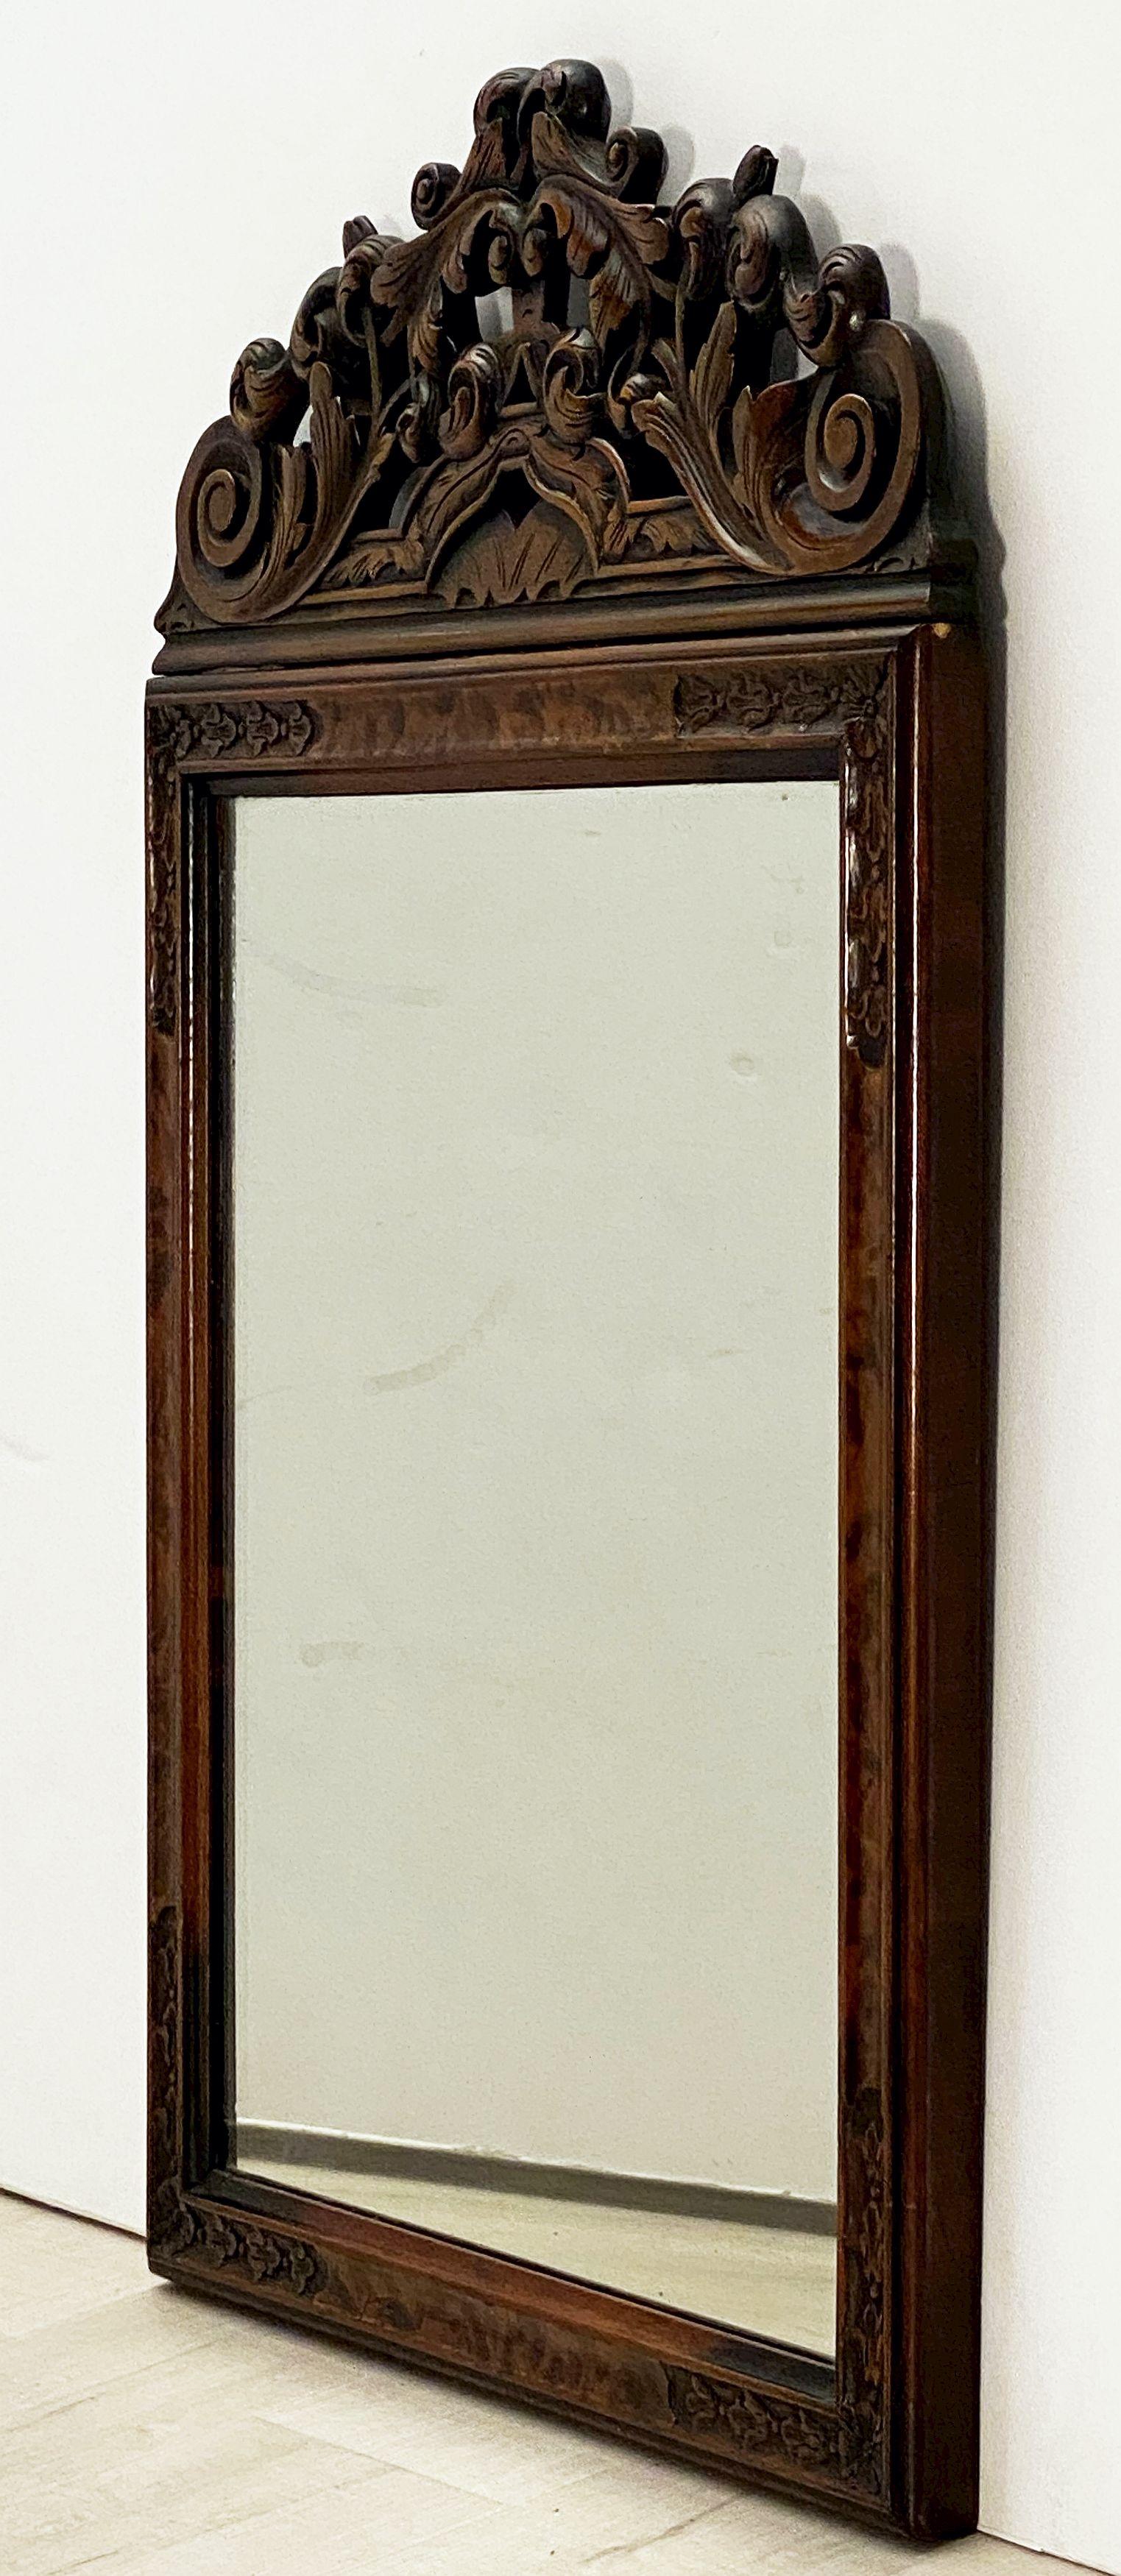 Edwardian English Rectangular Mirror in Carved Frame of Walnut (H 33 3/8 x W 21) For Sale